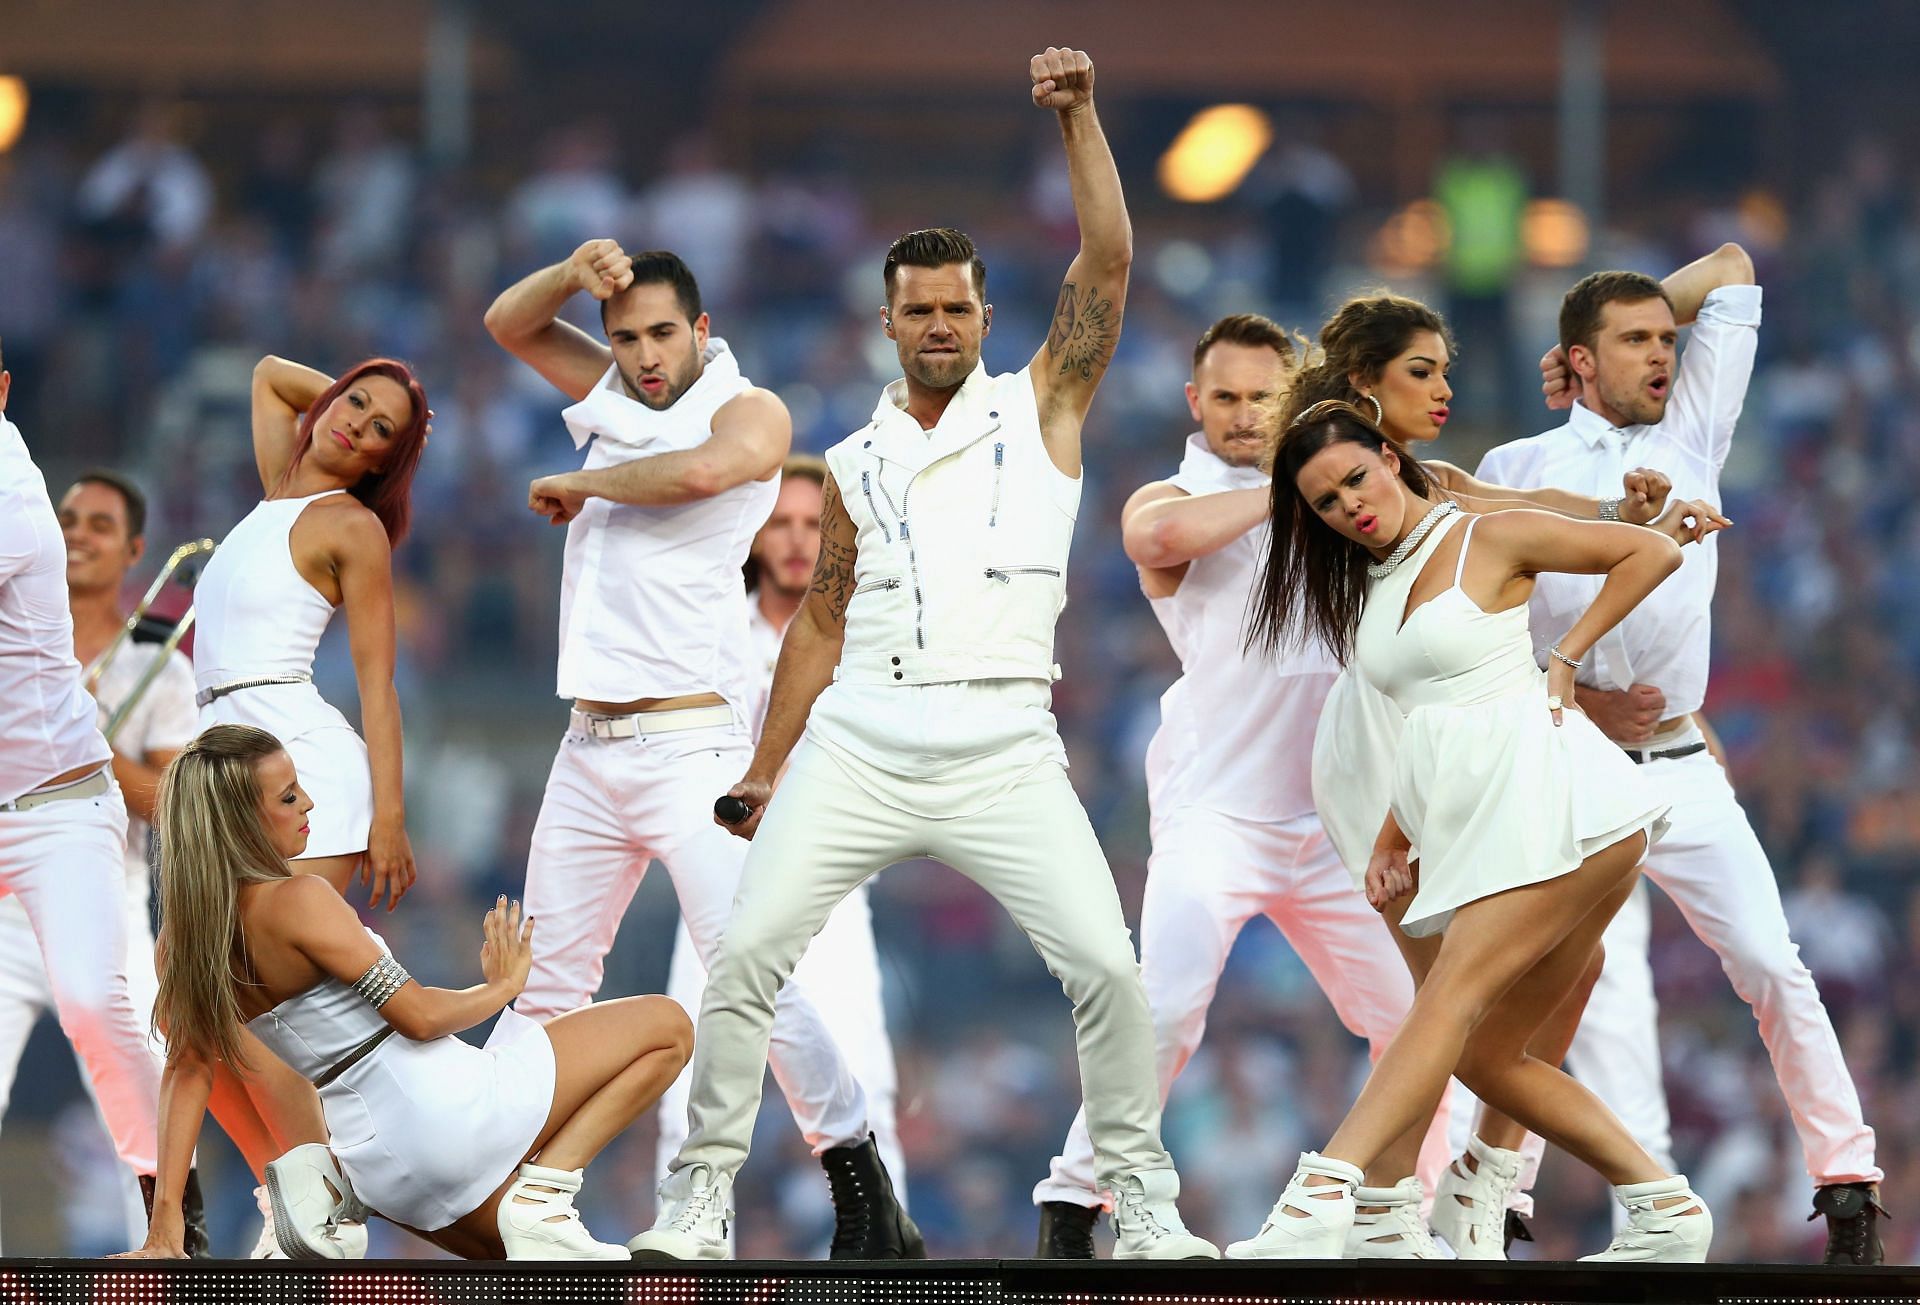 Ricky Martin performing at the 2013 NRL Grand Final - Roosters v Sea Eagles